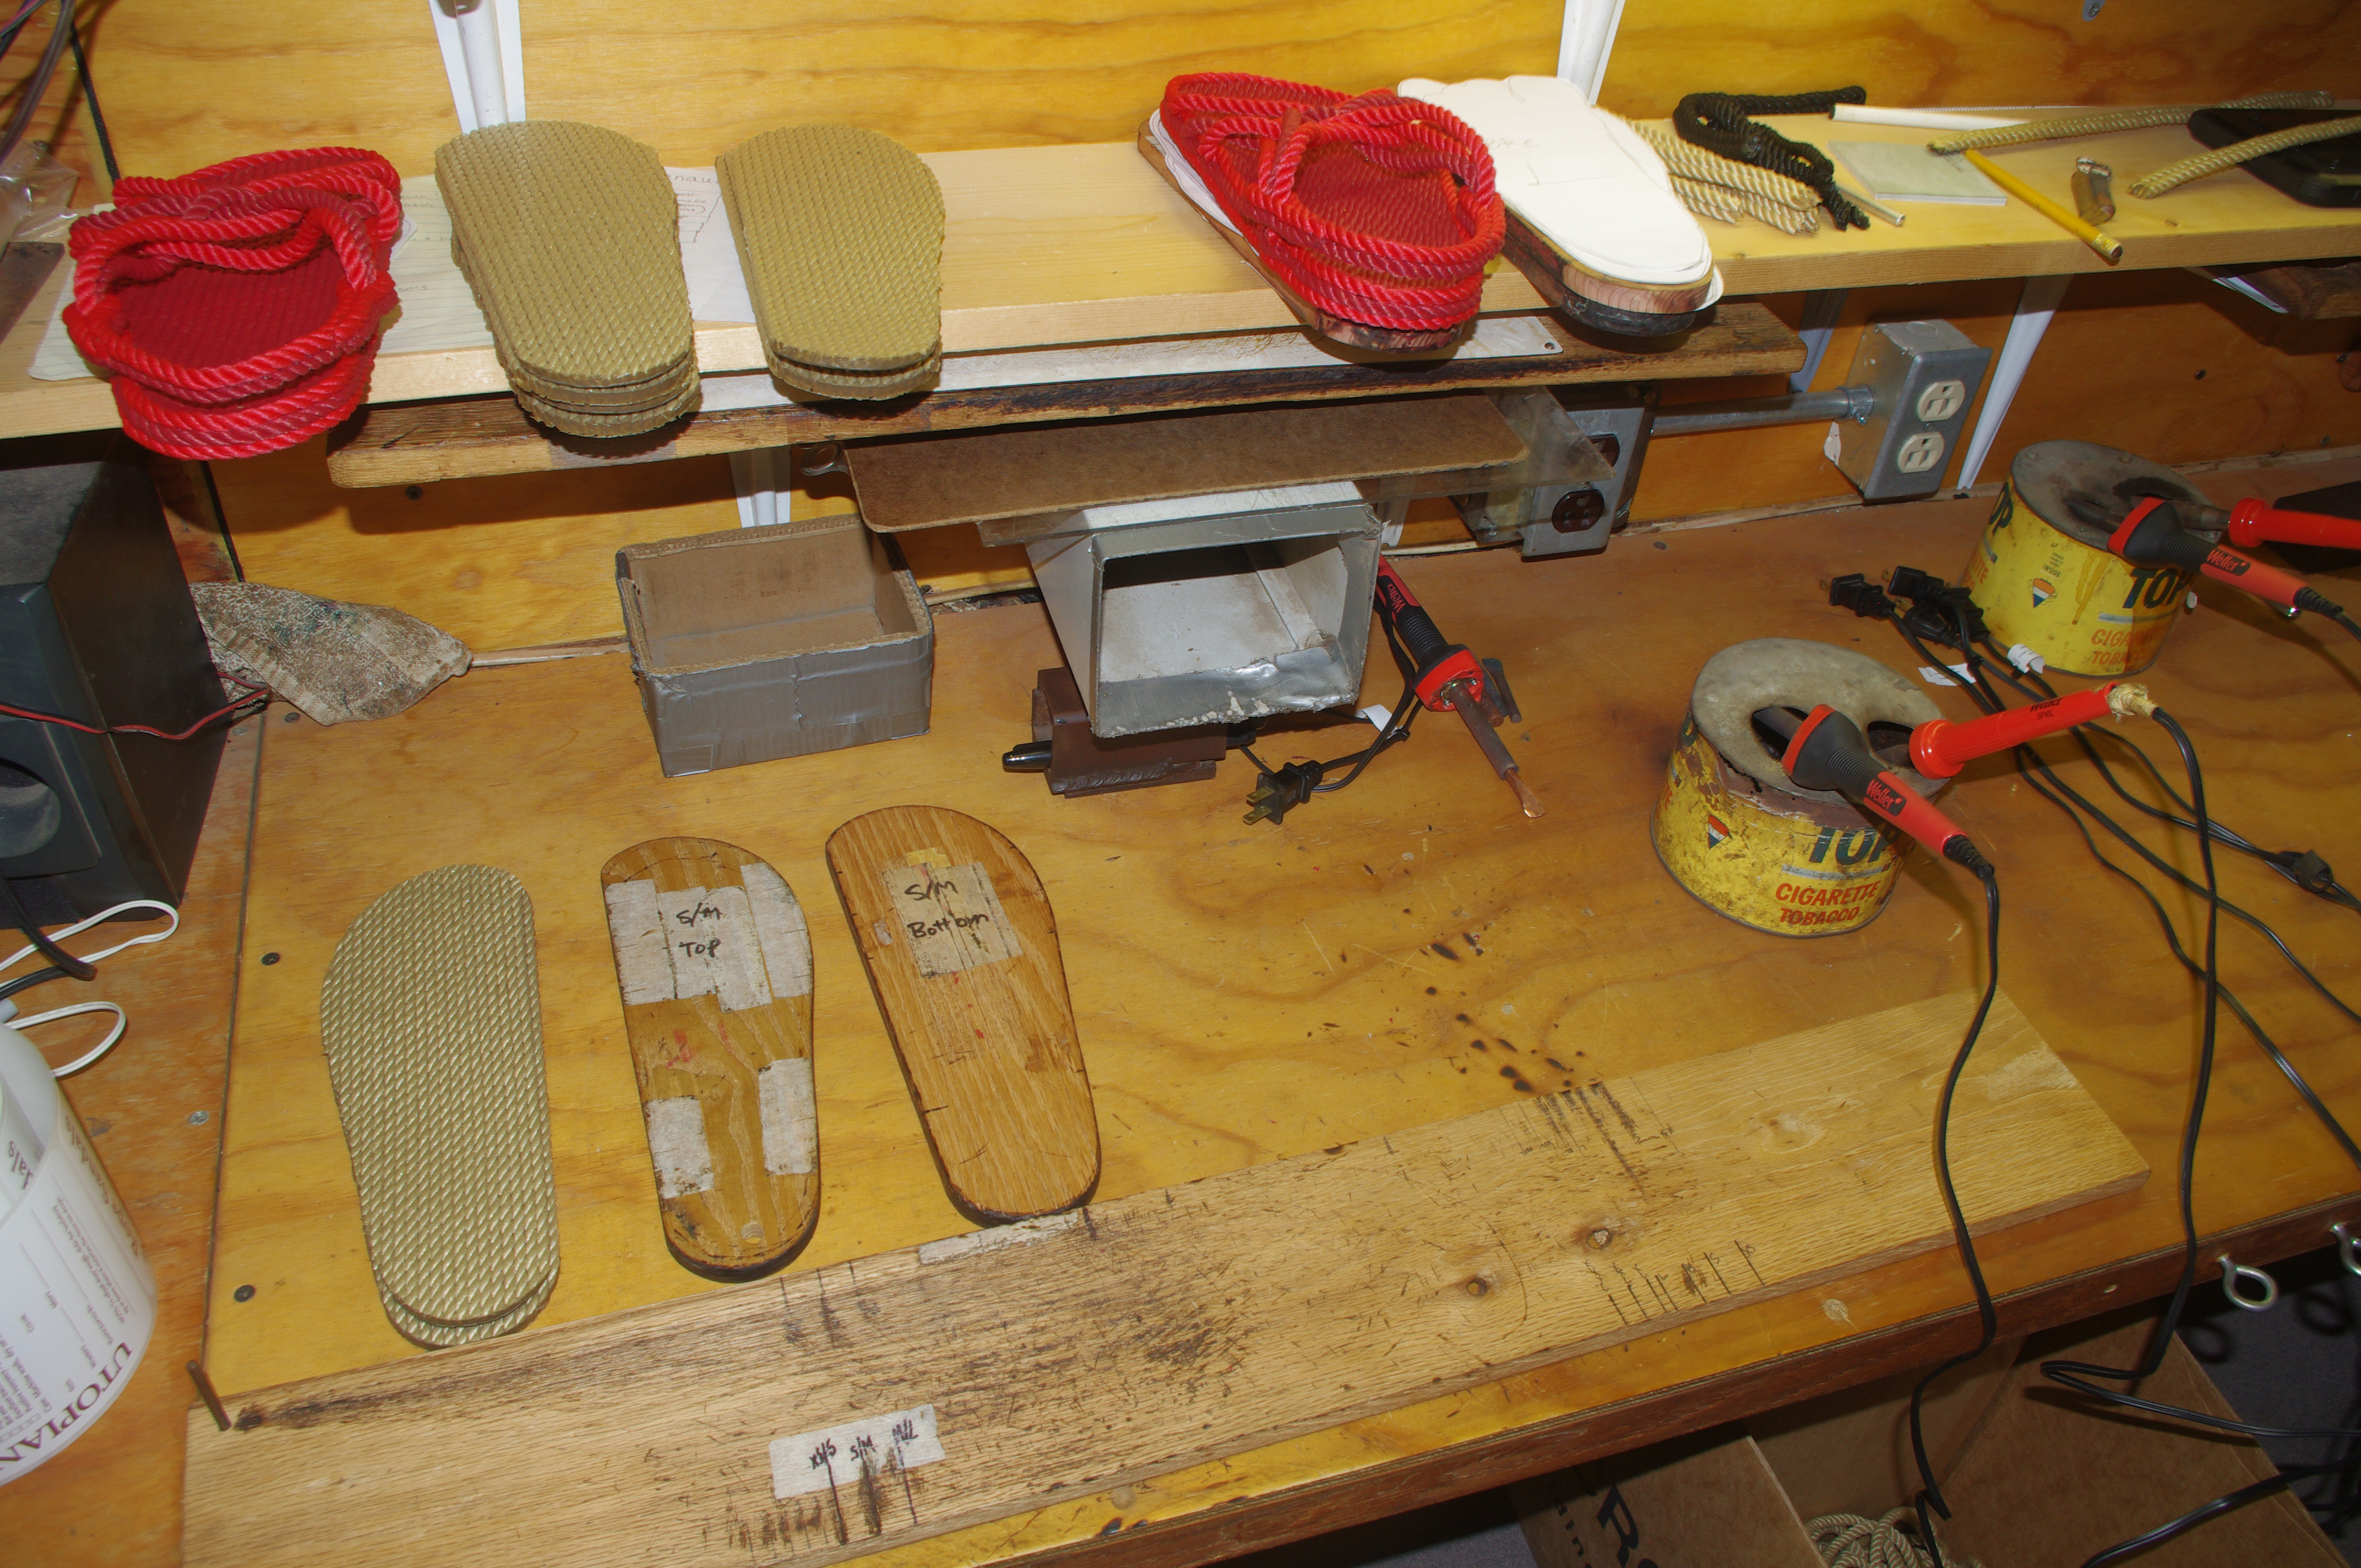 Products for which the East Wind Community is renowned include nut butter and its line of Utopian rope sandals, produced by its members in the on-site workshop